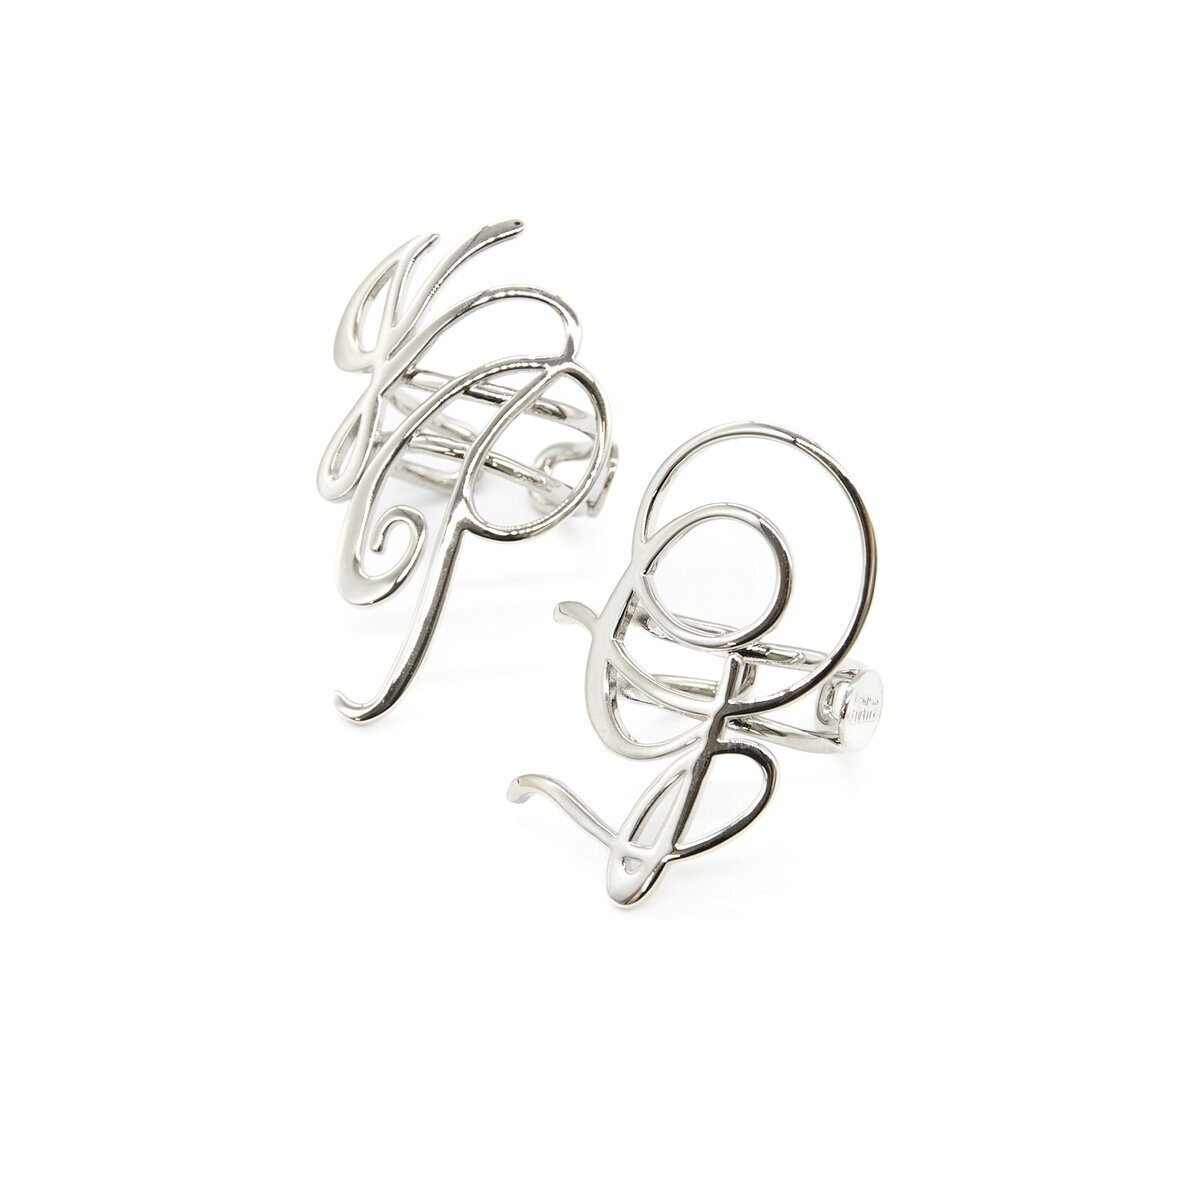 JPG Signature Double Ring in Silver - 3